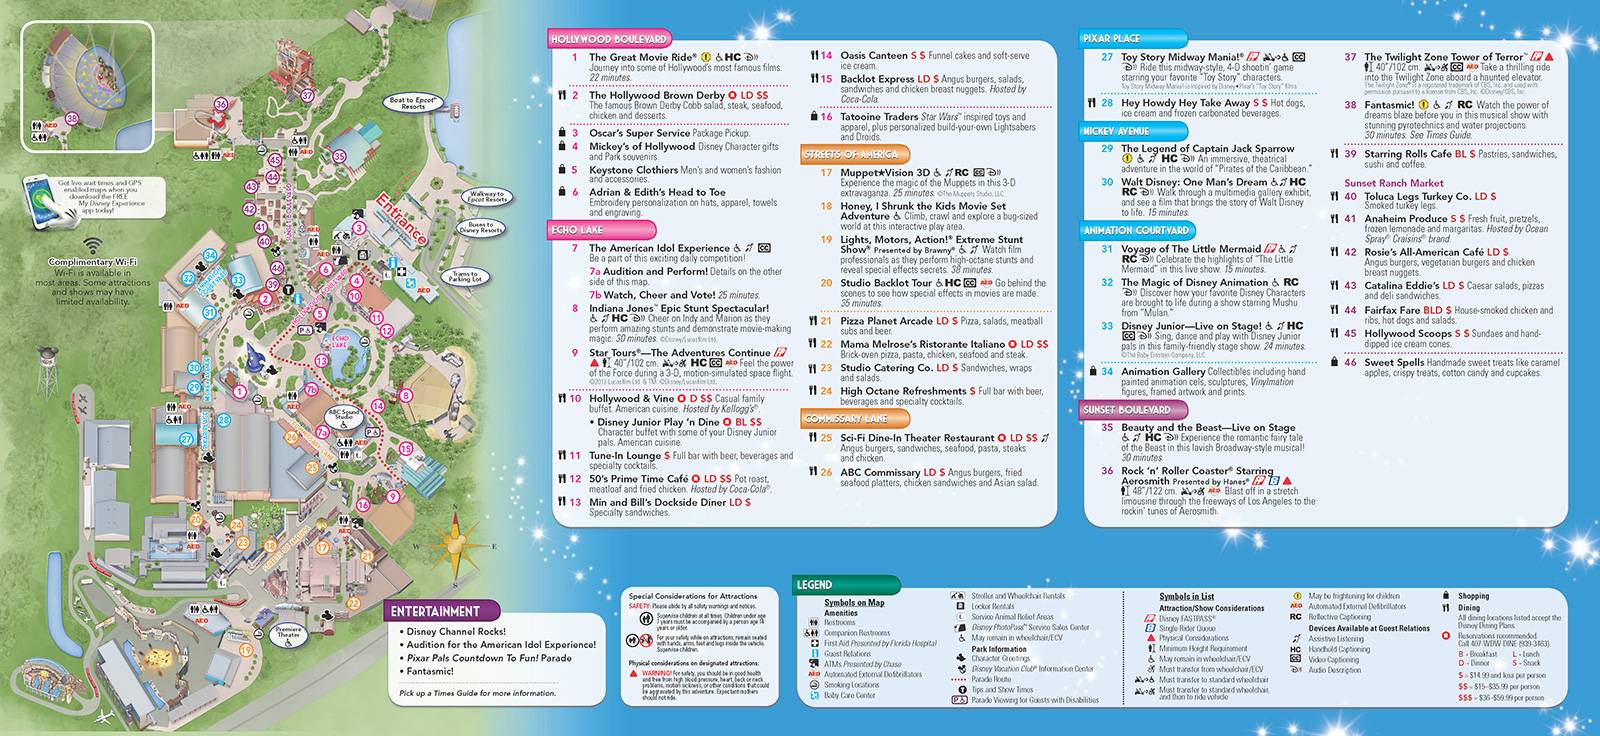 New 2013 Disney's Hollywood Studios Guidemap Page 2